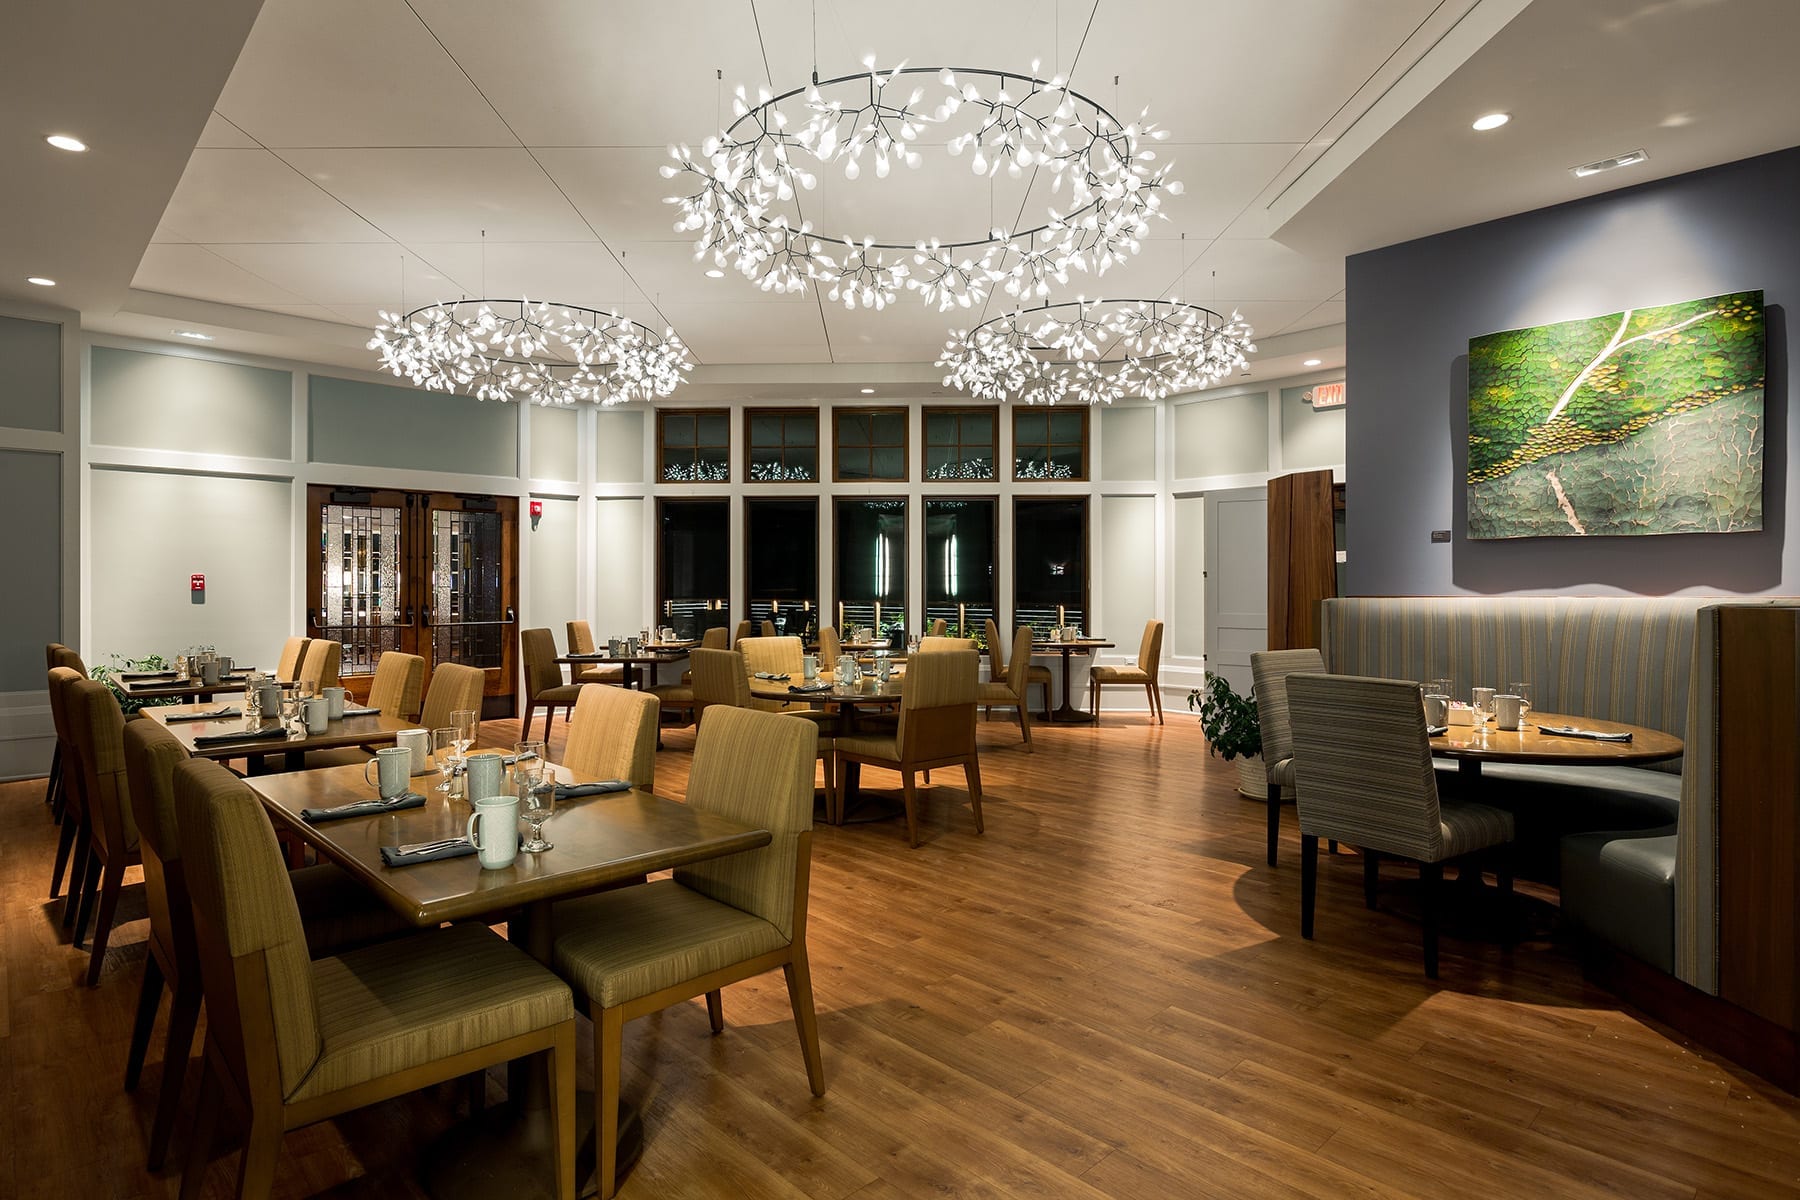 Woodnotes grille stream side dining room at night